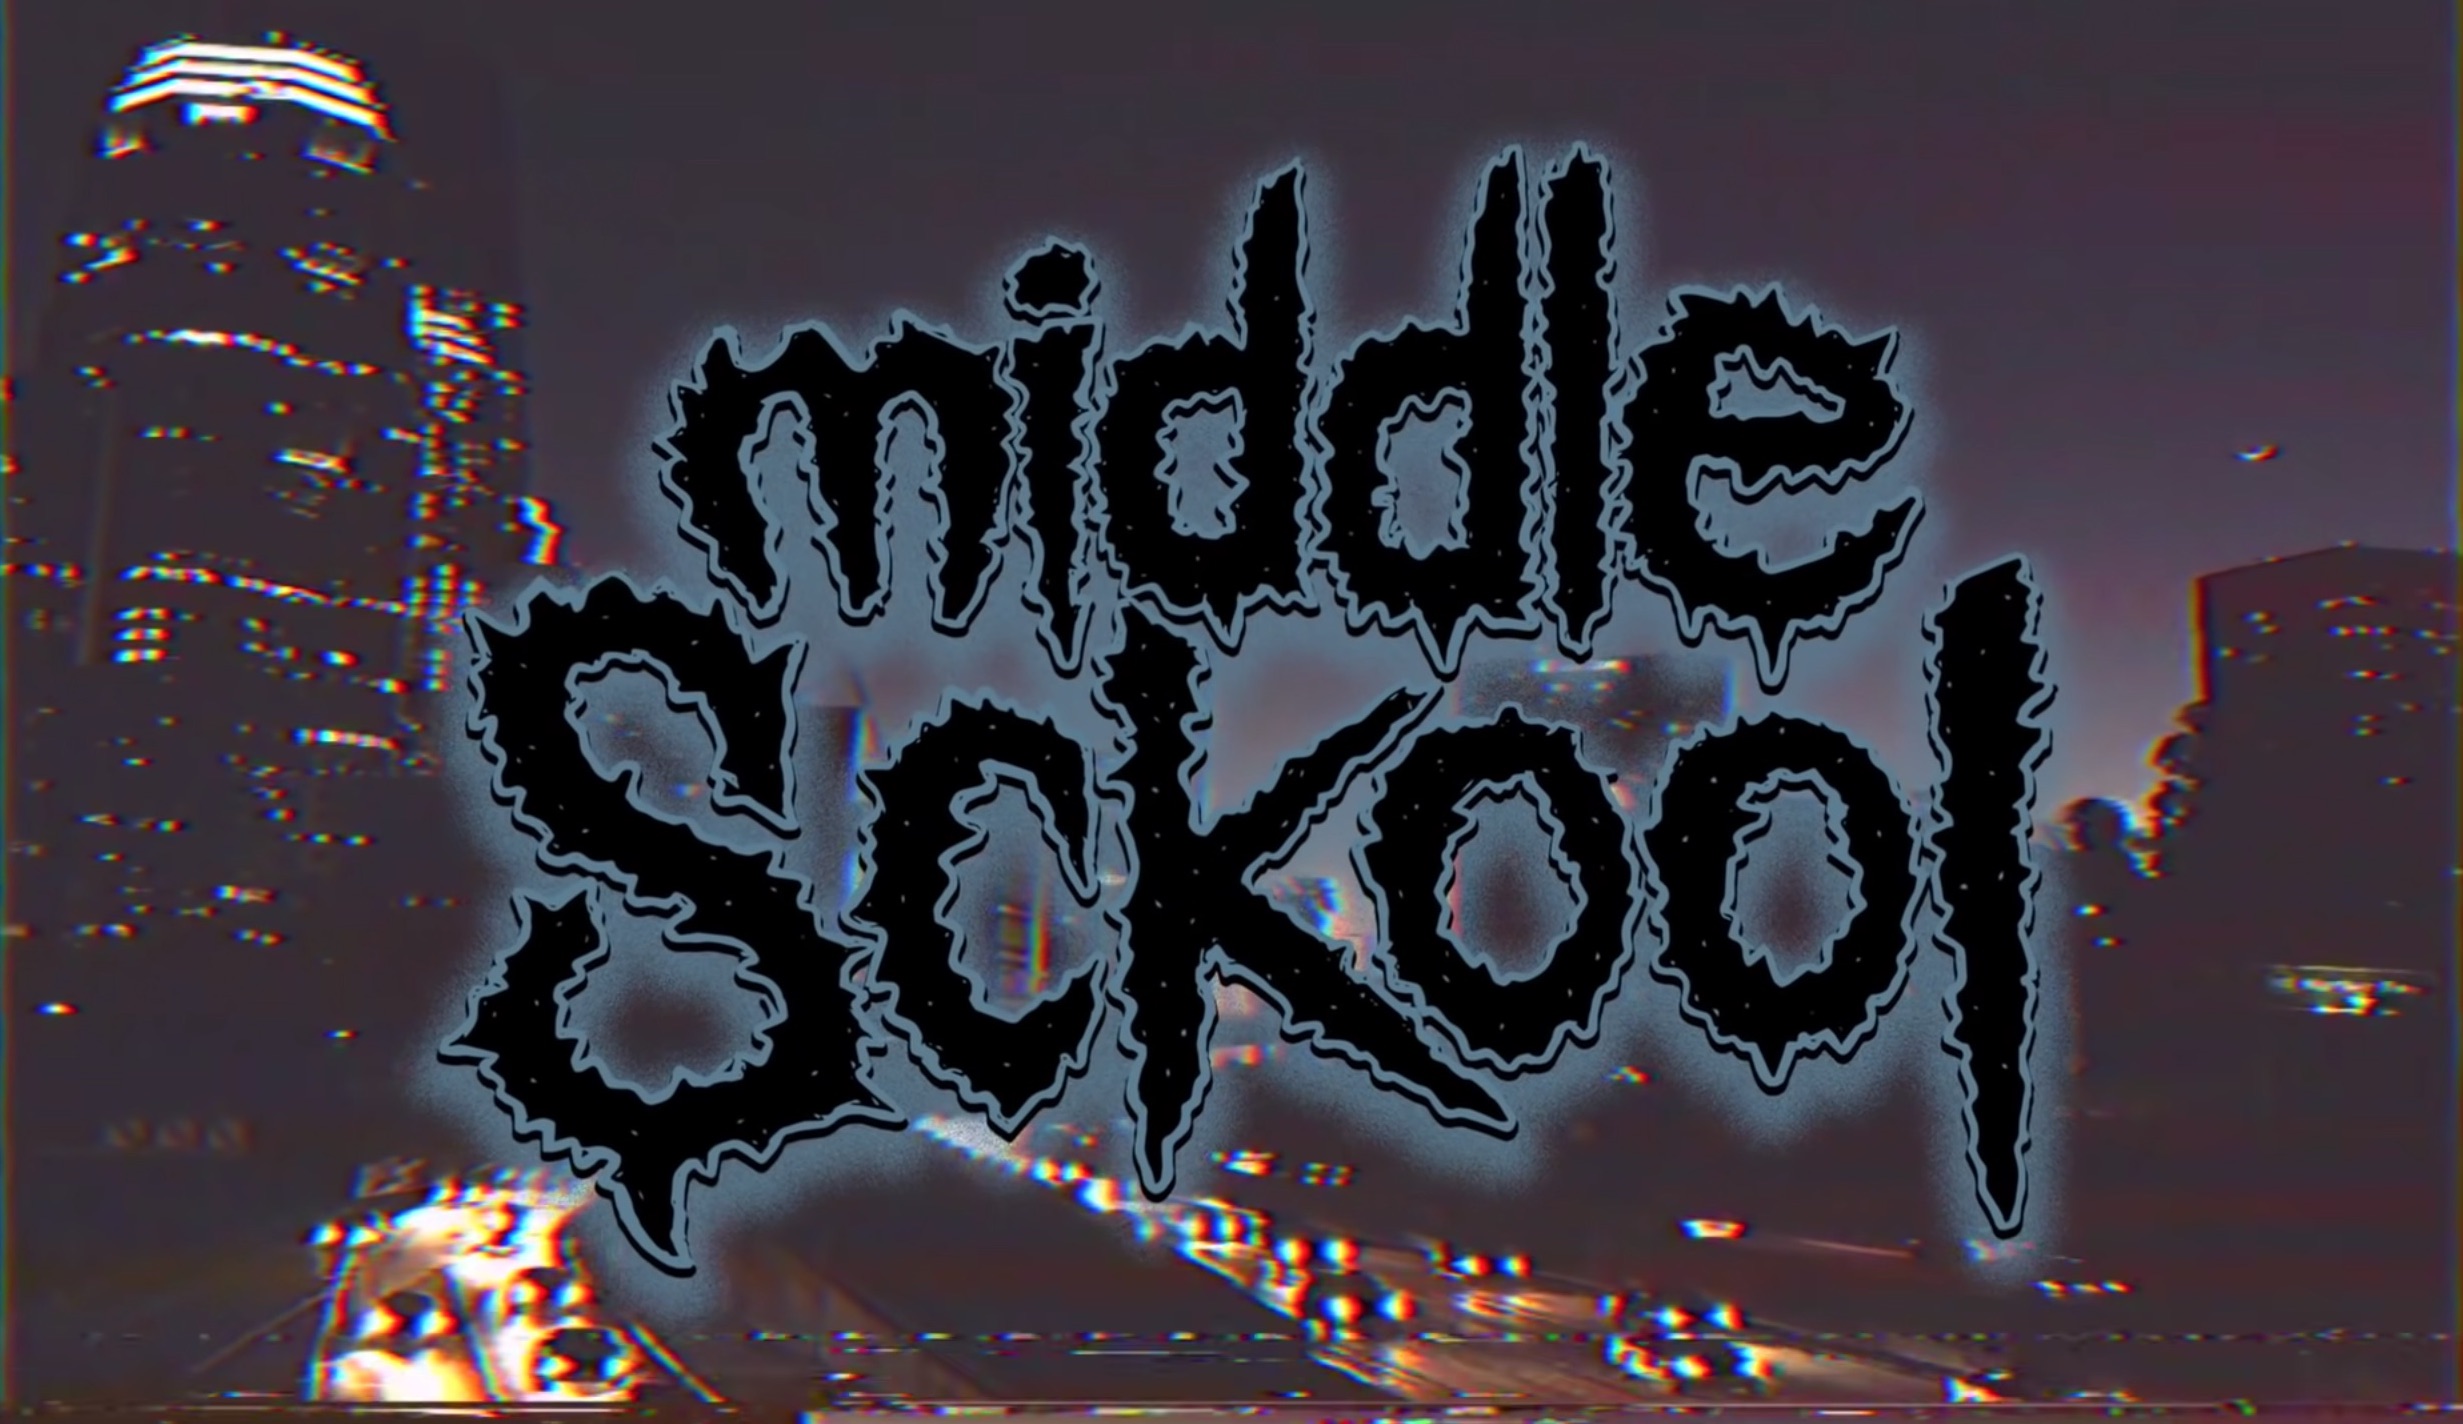 10C41 - Middle Sckool cover art